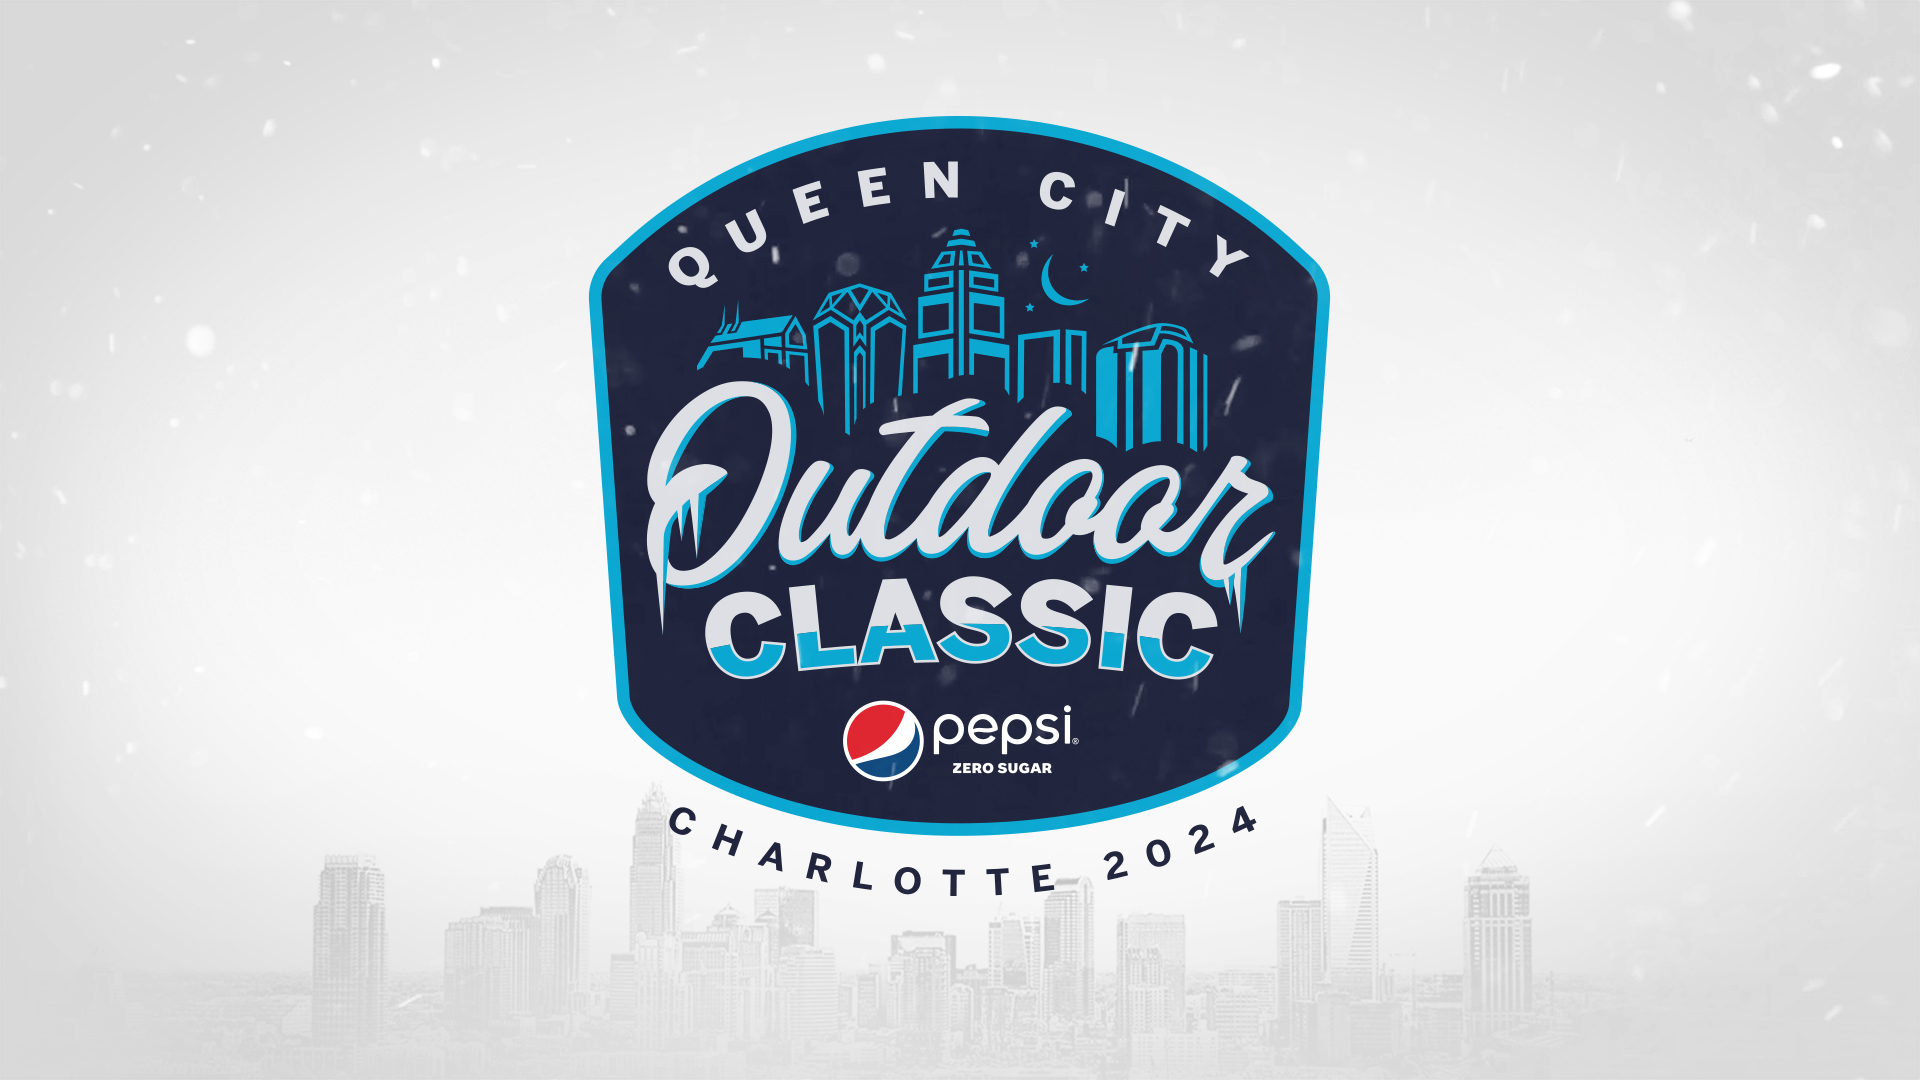 Queen City Outdoor Classic to Take Place at Truist Field in January